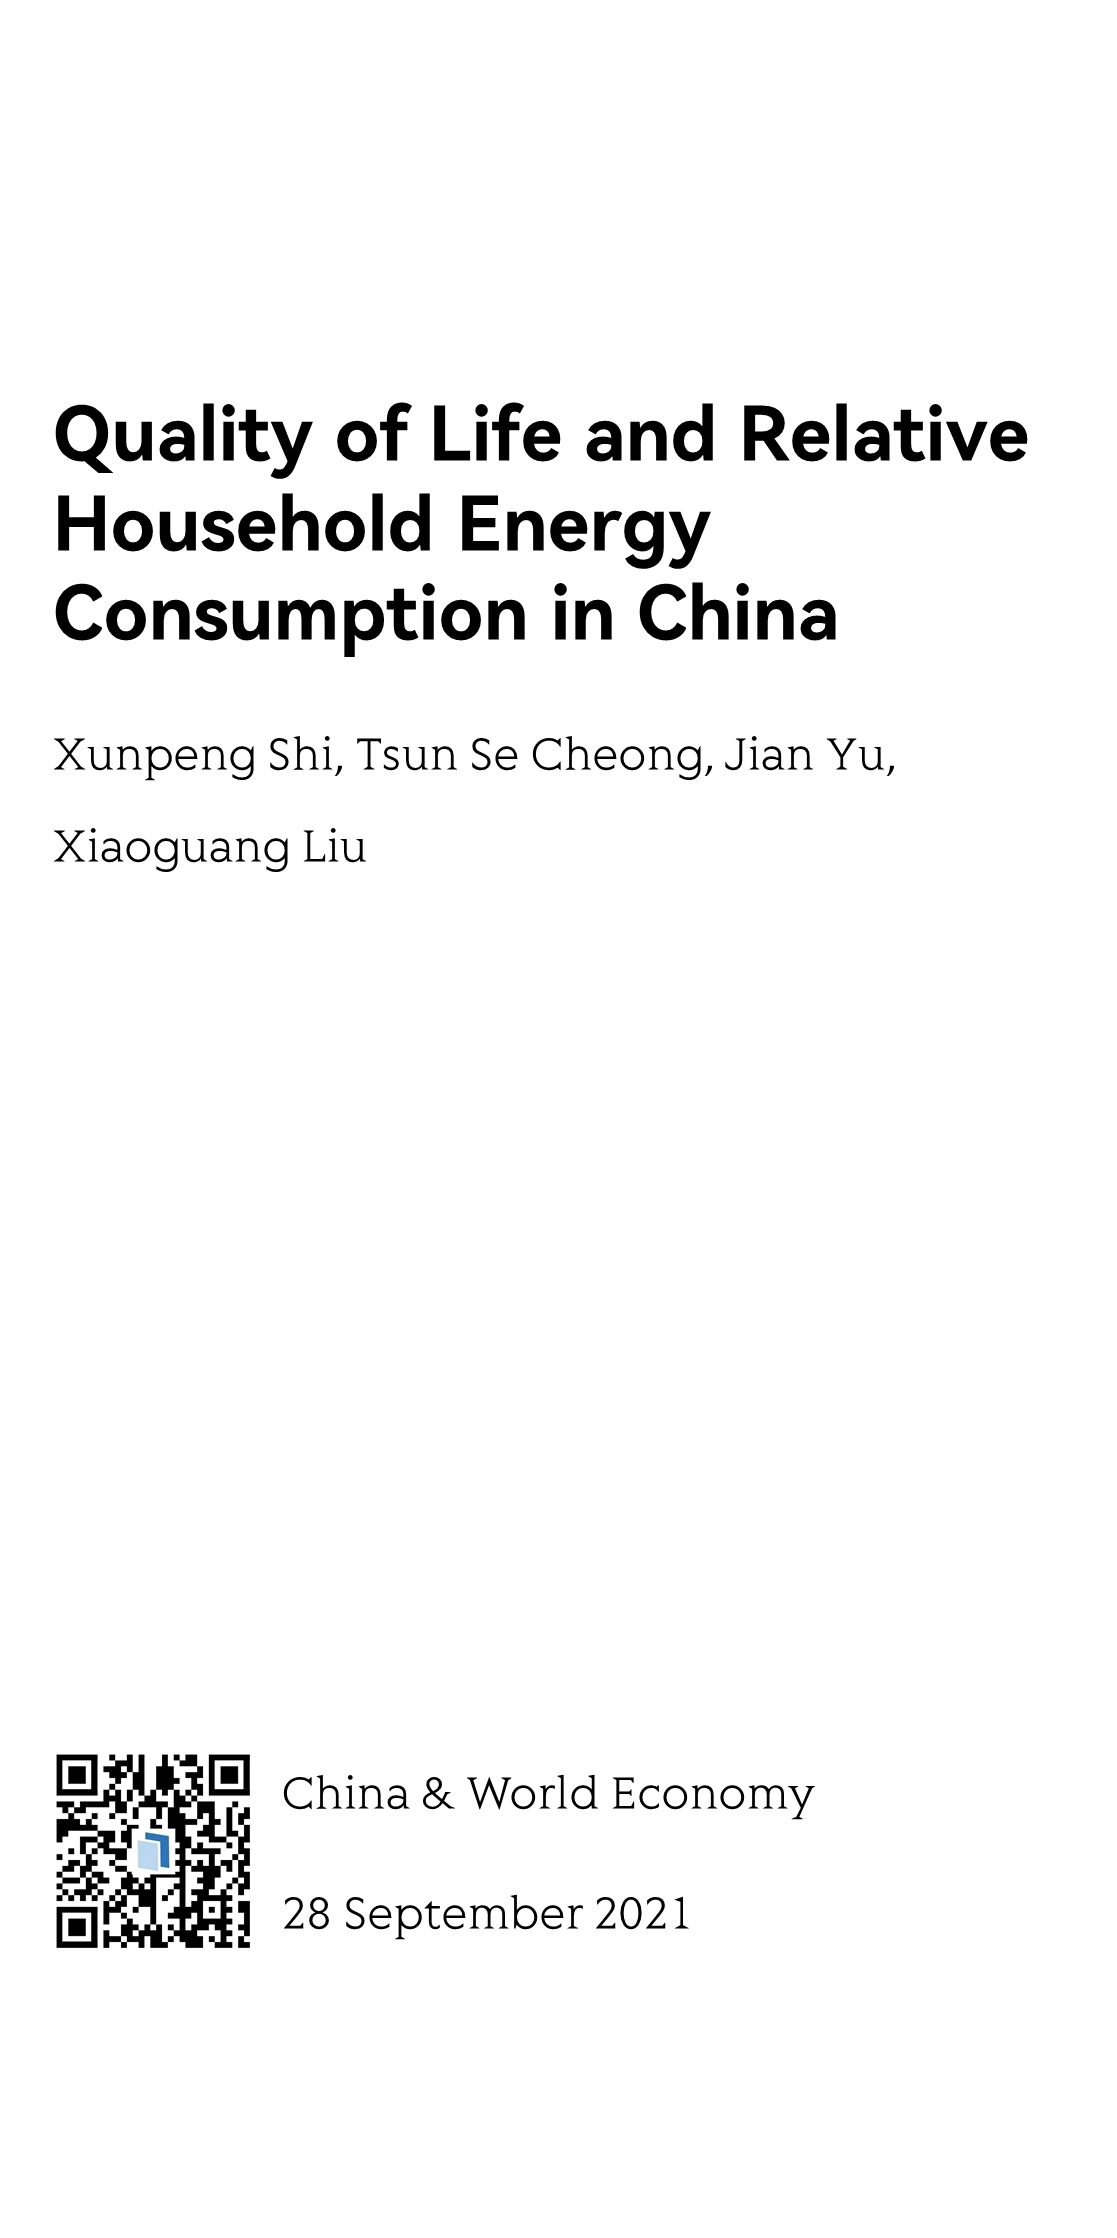 Quality of Life and Relative Household Energy Consumption in China_1